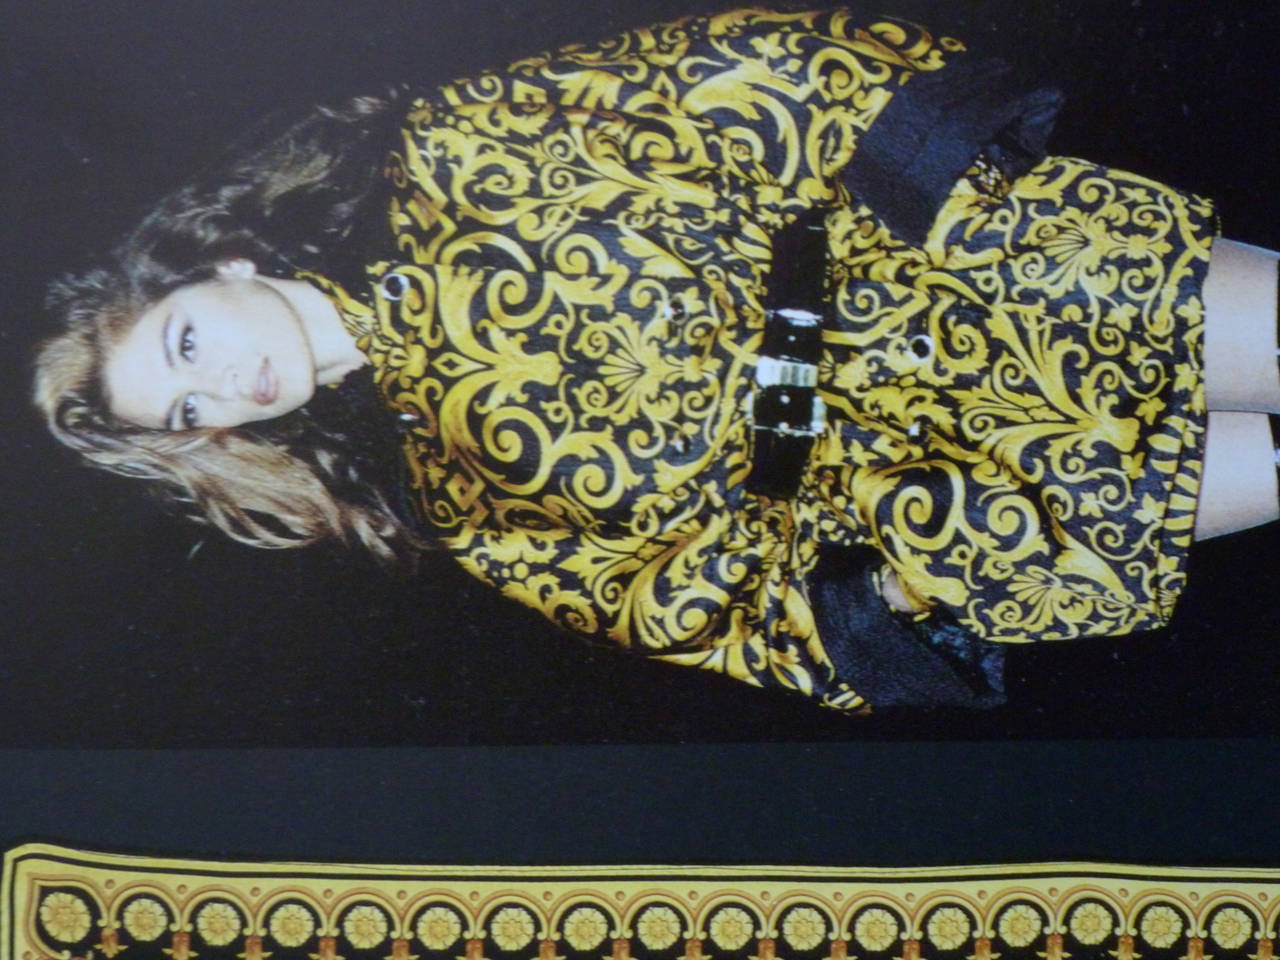 Iconic Gianni Versace Baroque Print Silk Raincoat Fall 1991 In Excellent Condition For Sale In W1, GB